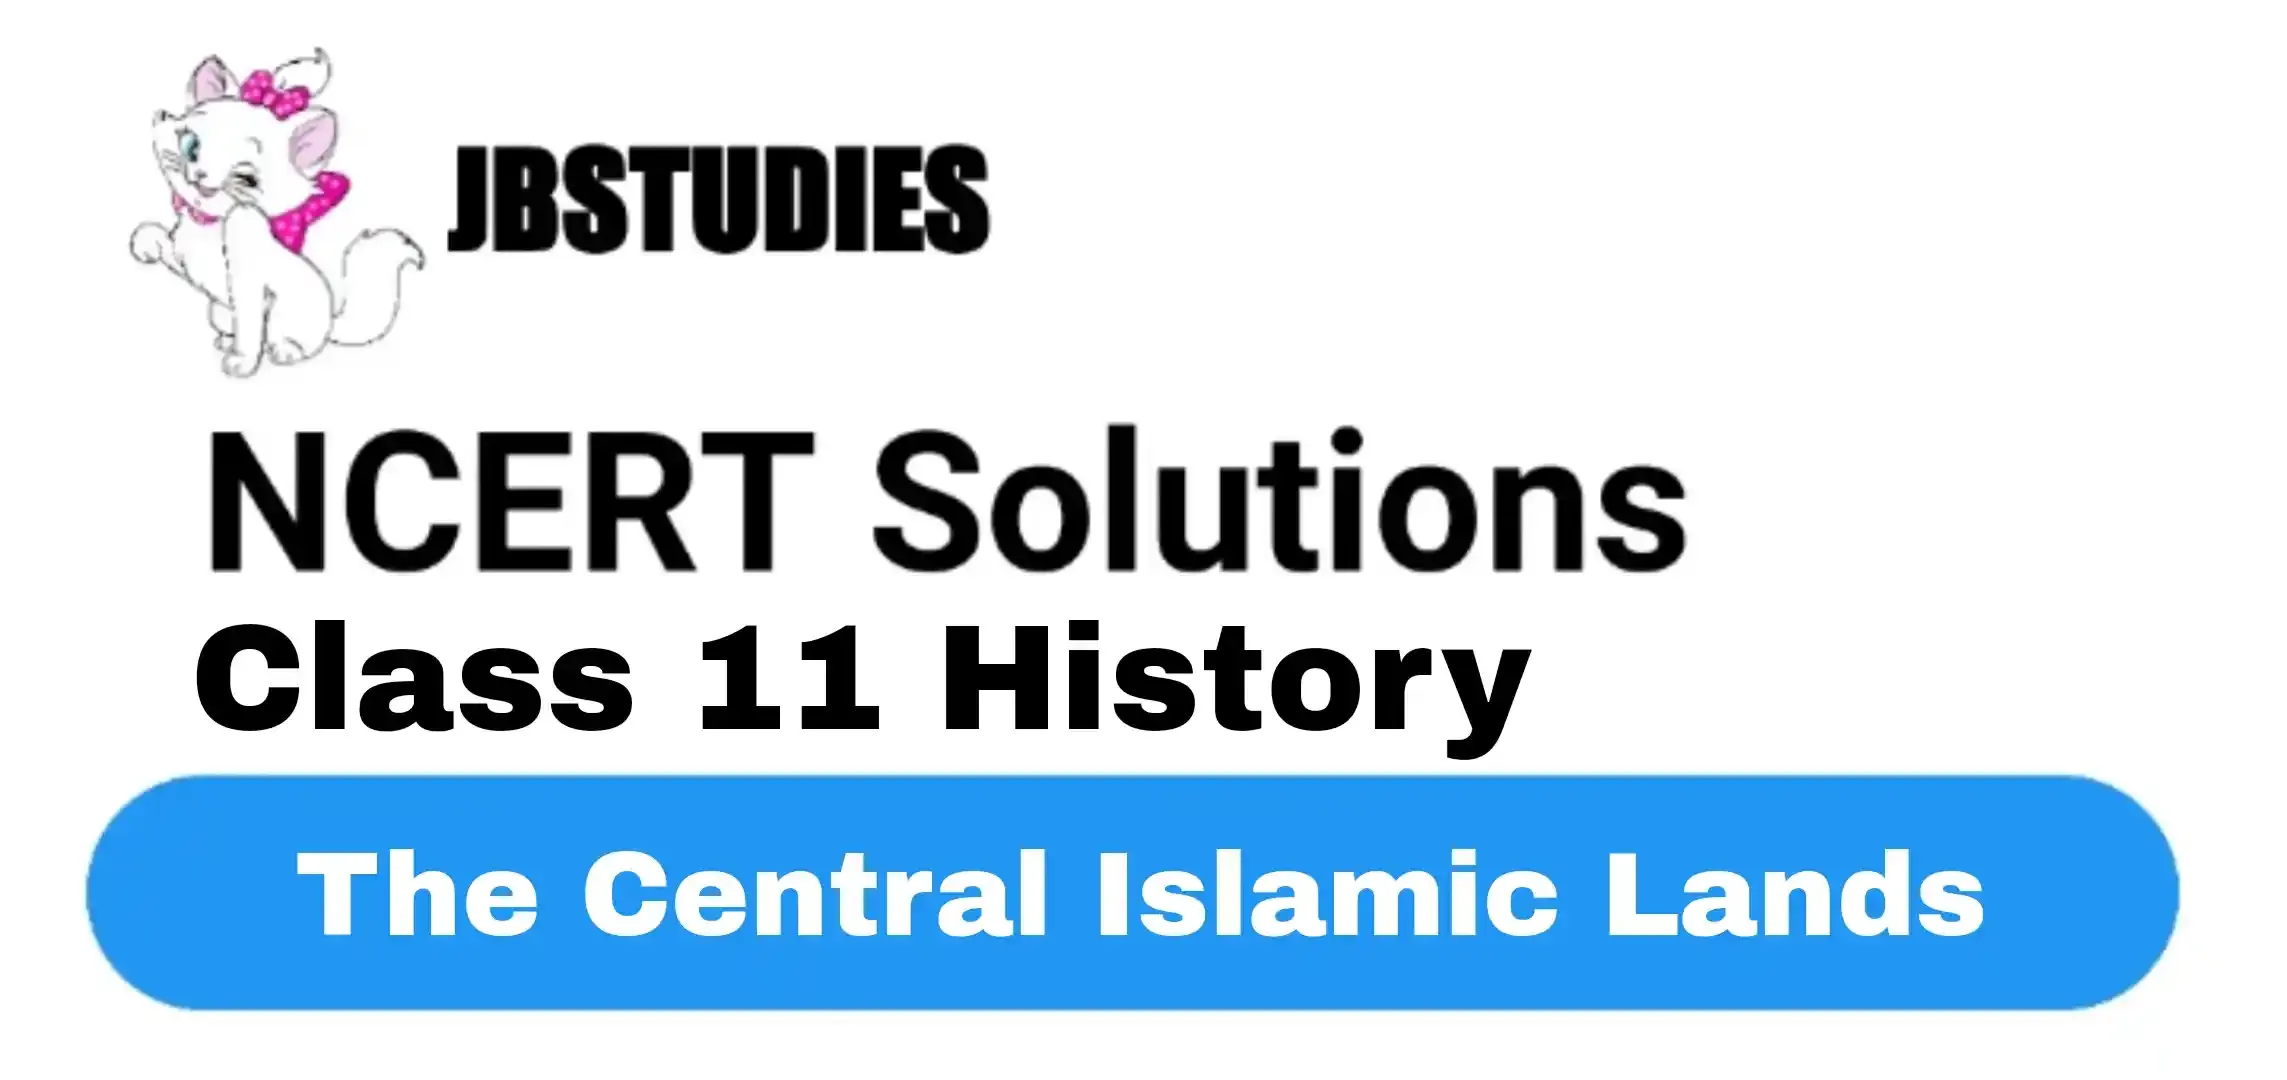 Solutions Class 11 History Chapter-4 The Central Islamic Lands